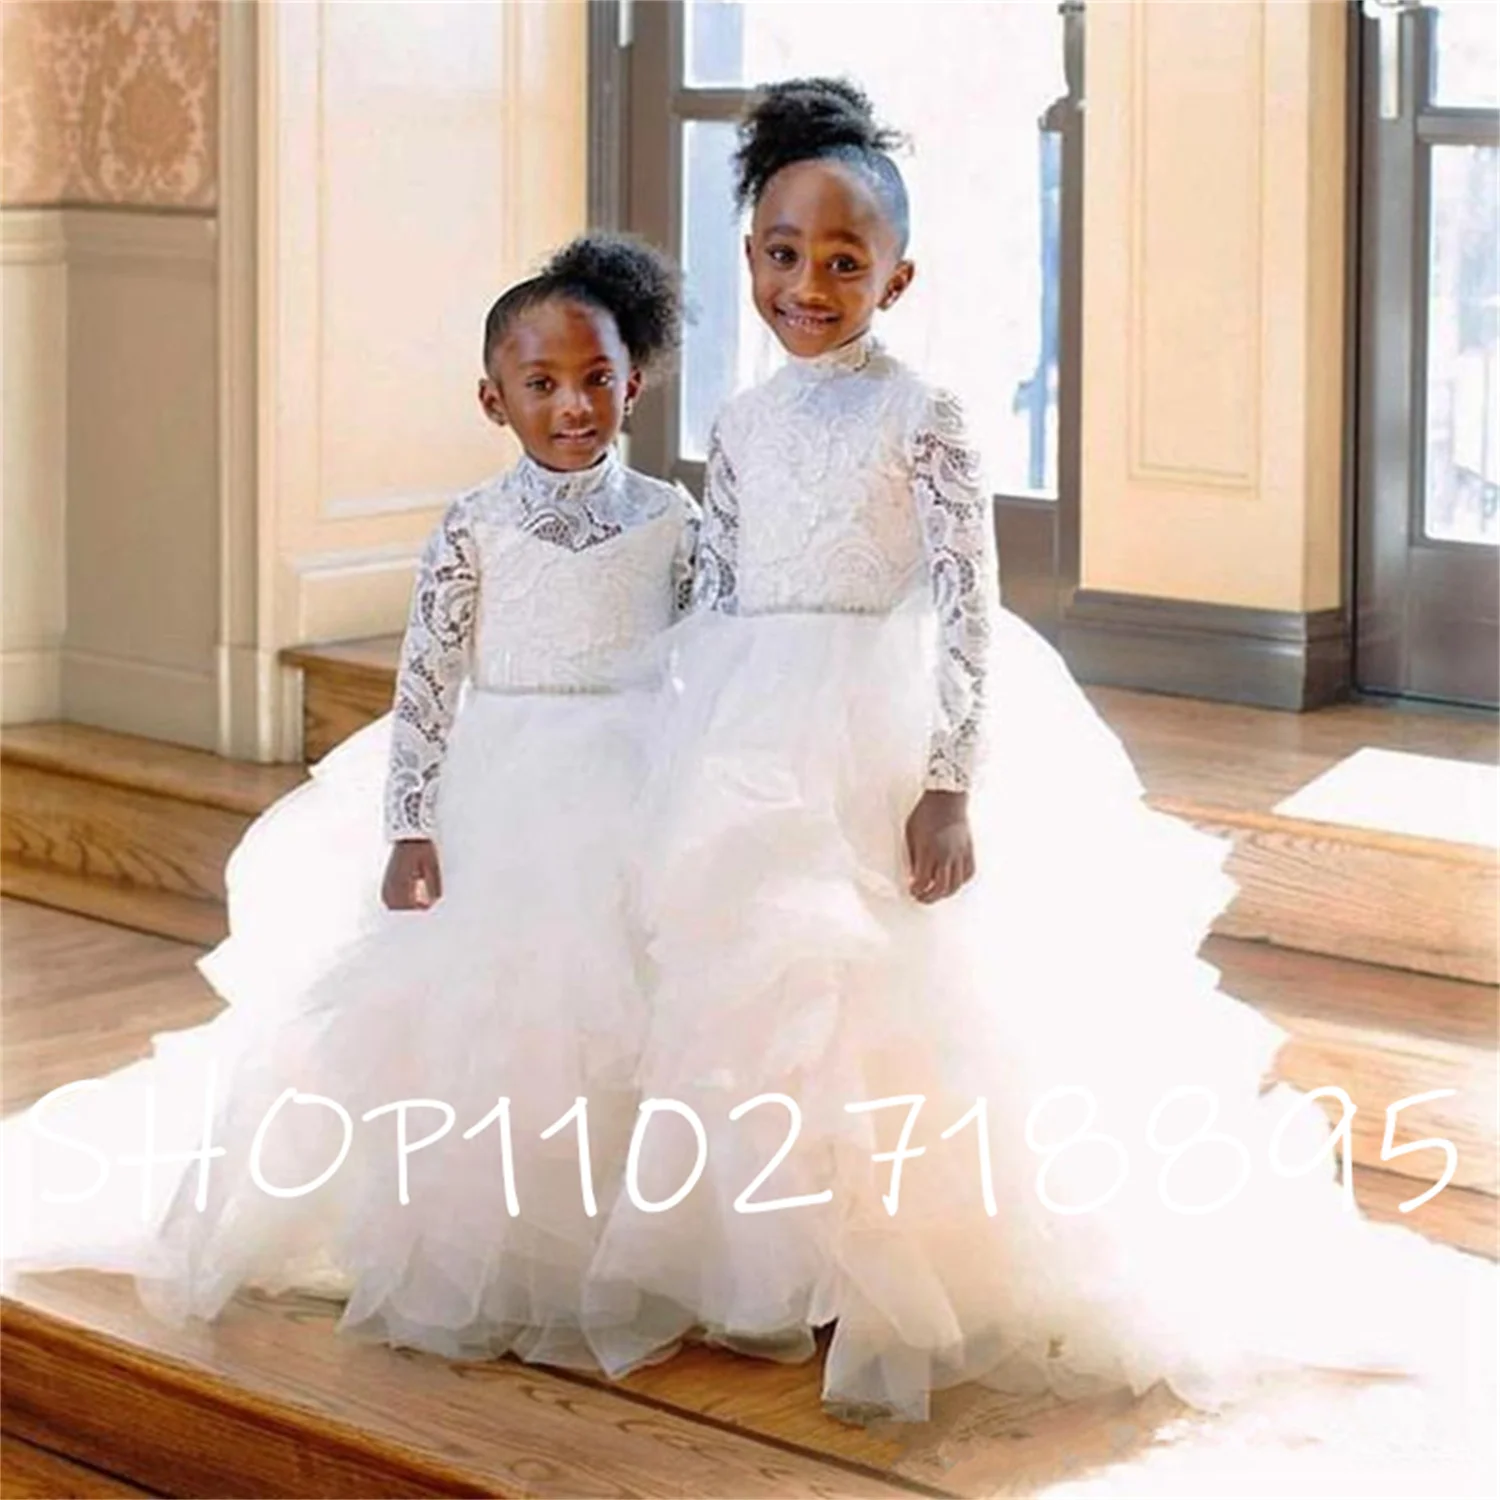 

High Neck Lace Flower Girl Dresses With Crystal Sash Long Sleeves Toddler Wedding Gowns Lace And Tulle Tiered Pageant Skirts